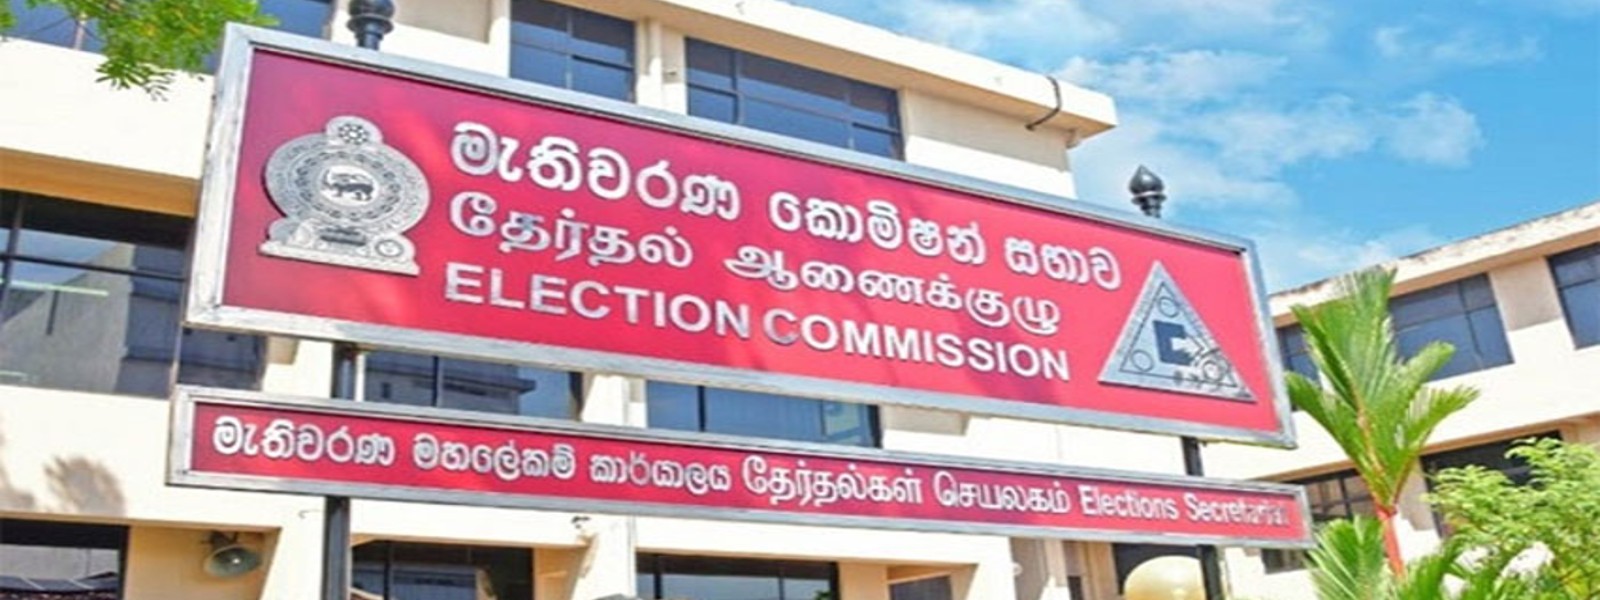 Local Govt Poll gazette soon, says Elections Comm